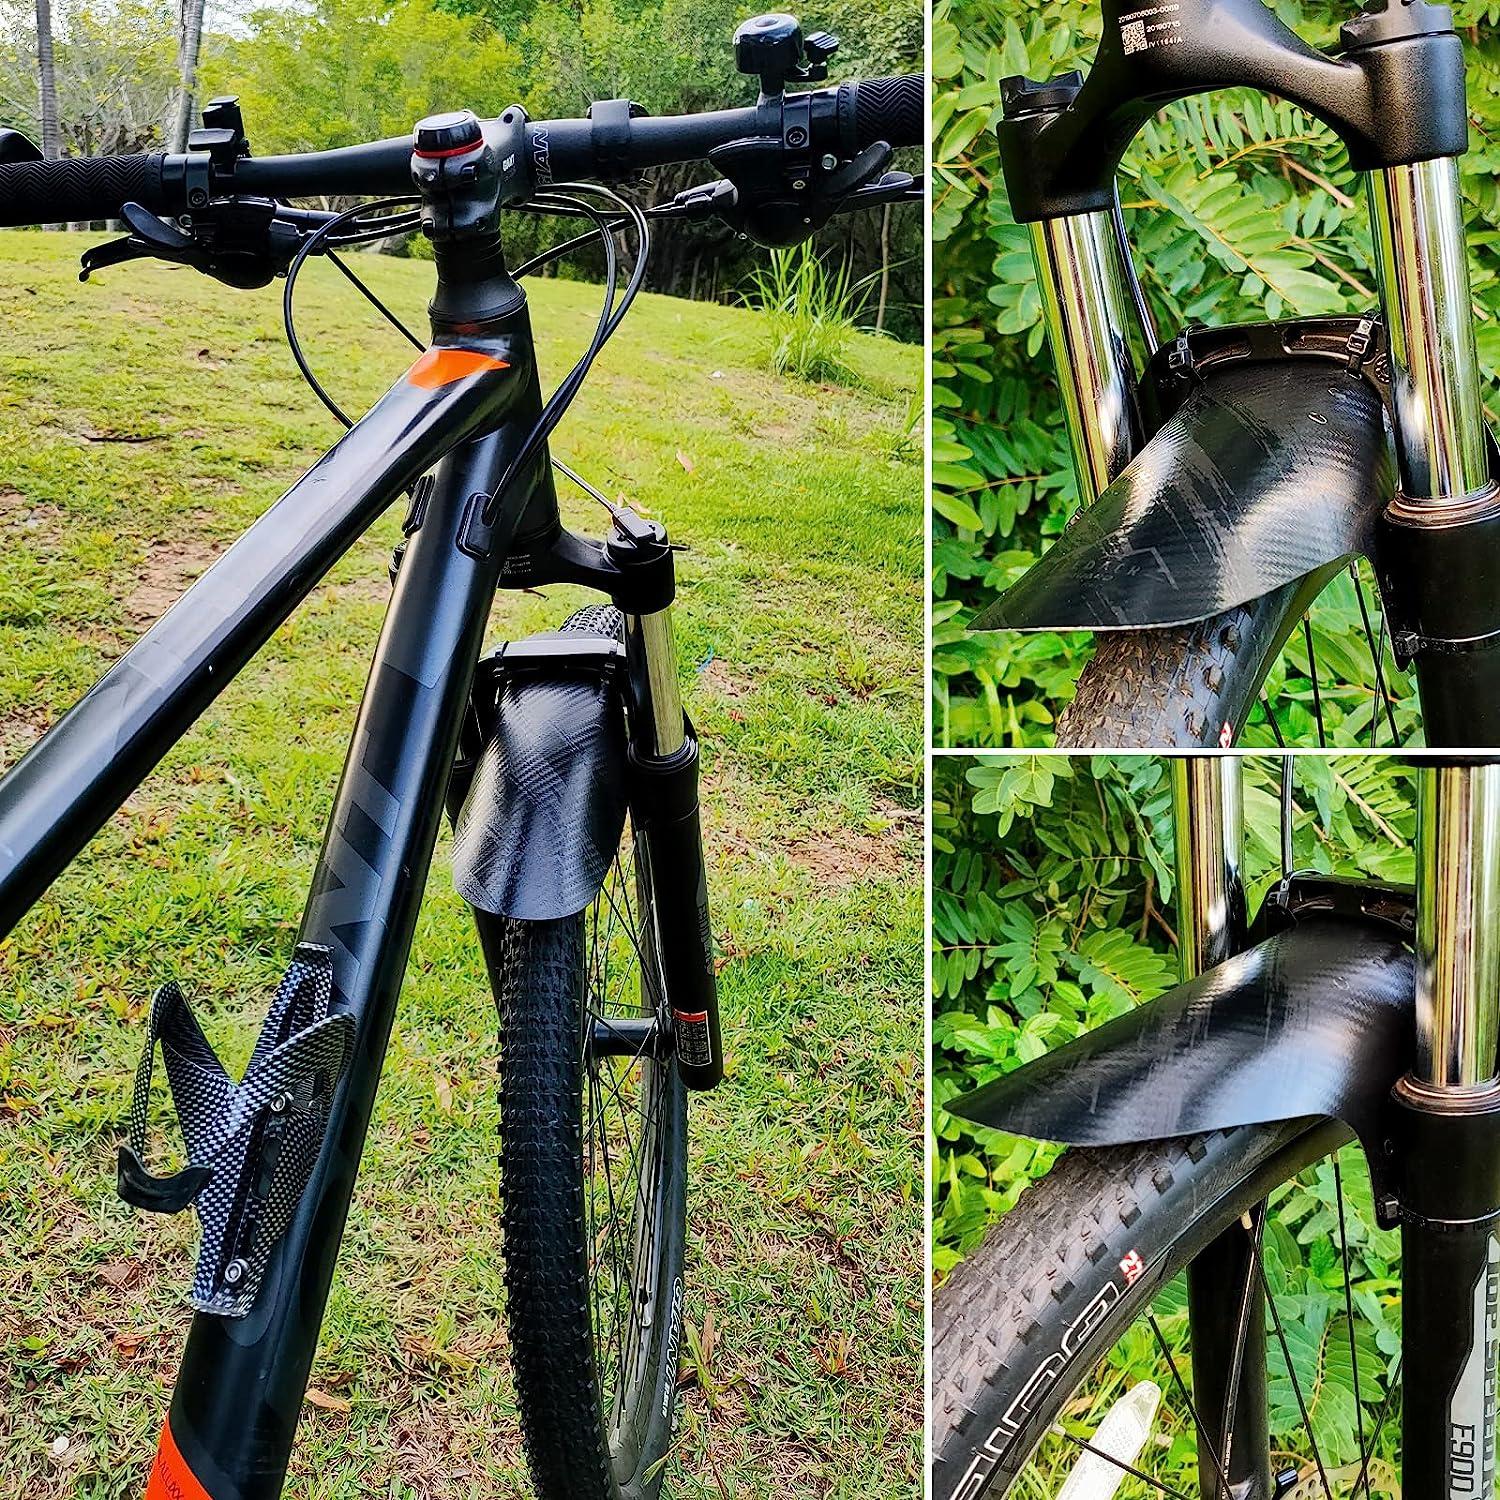 Best mountain bike mudguards  5 front and rear MTB mudguards, plus our  buyer's guide - BikeRadar